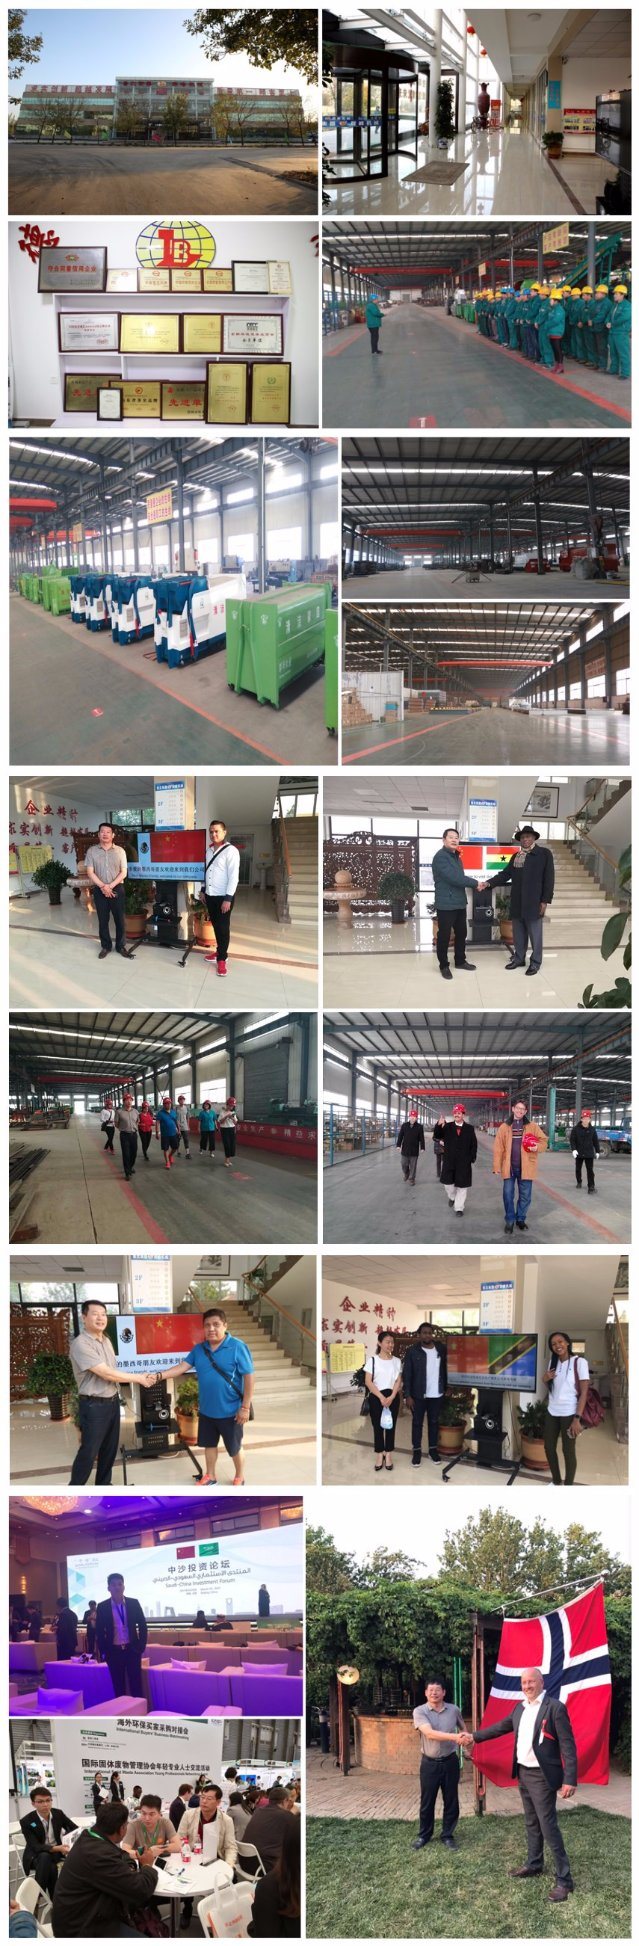 Msw/ Waste Sorting System /Machine /Equipment with Ce/Mbf/Recycling System/ Municipal Waste